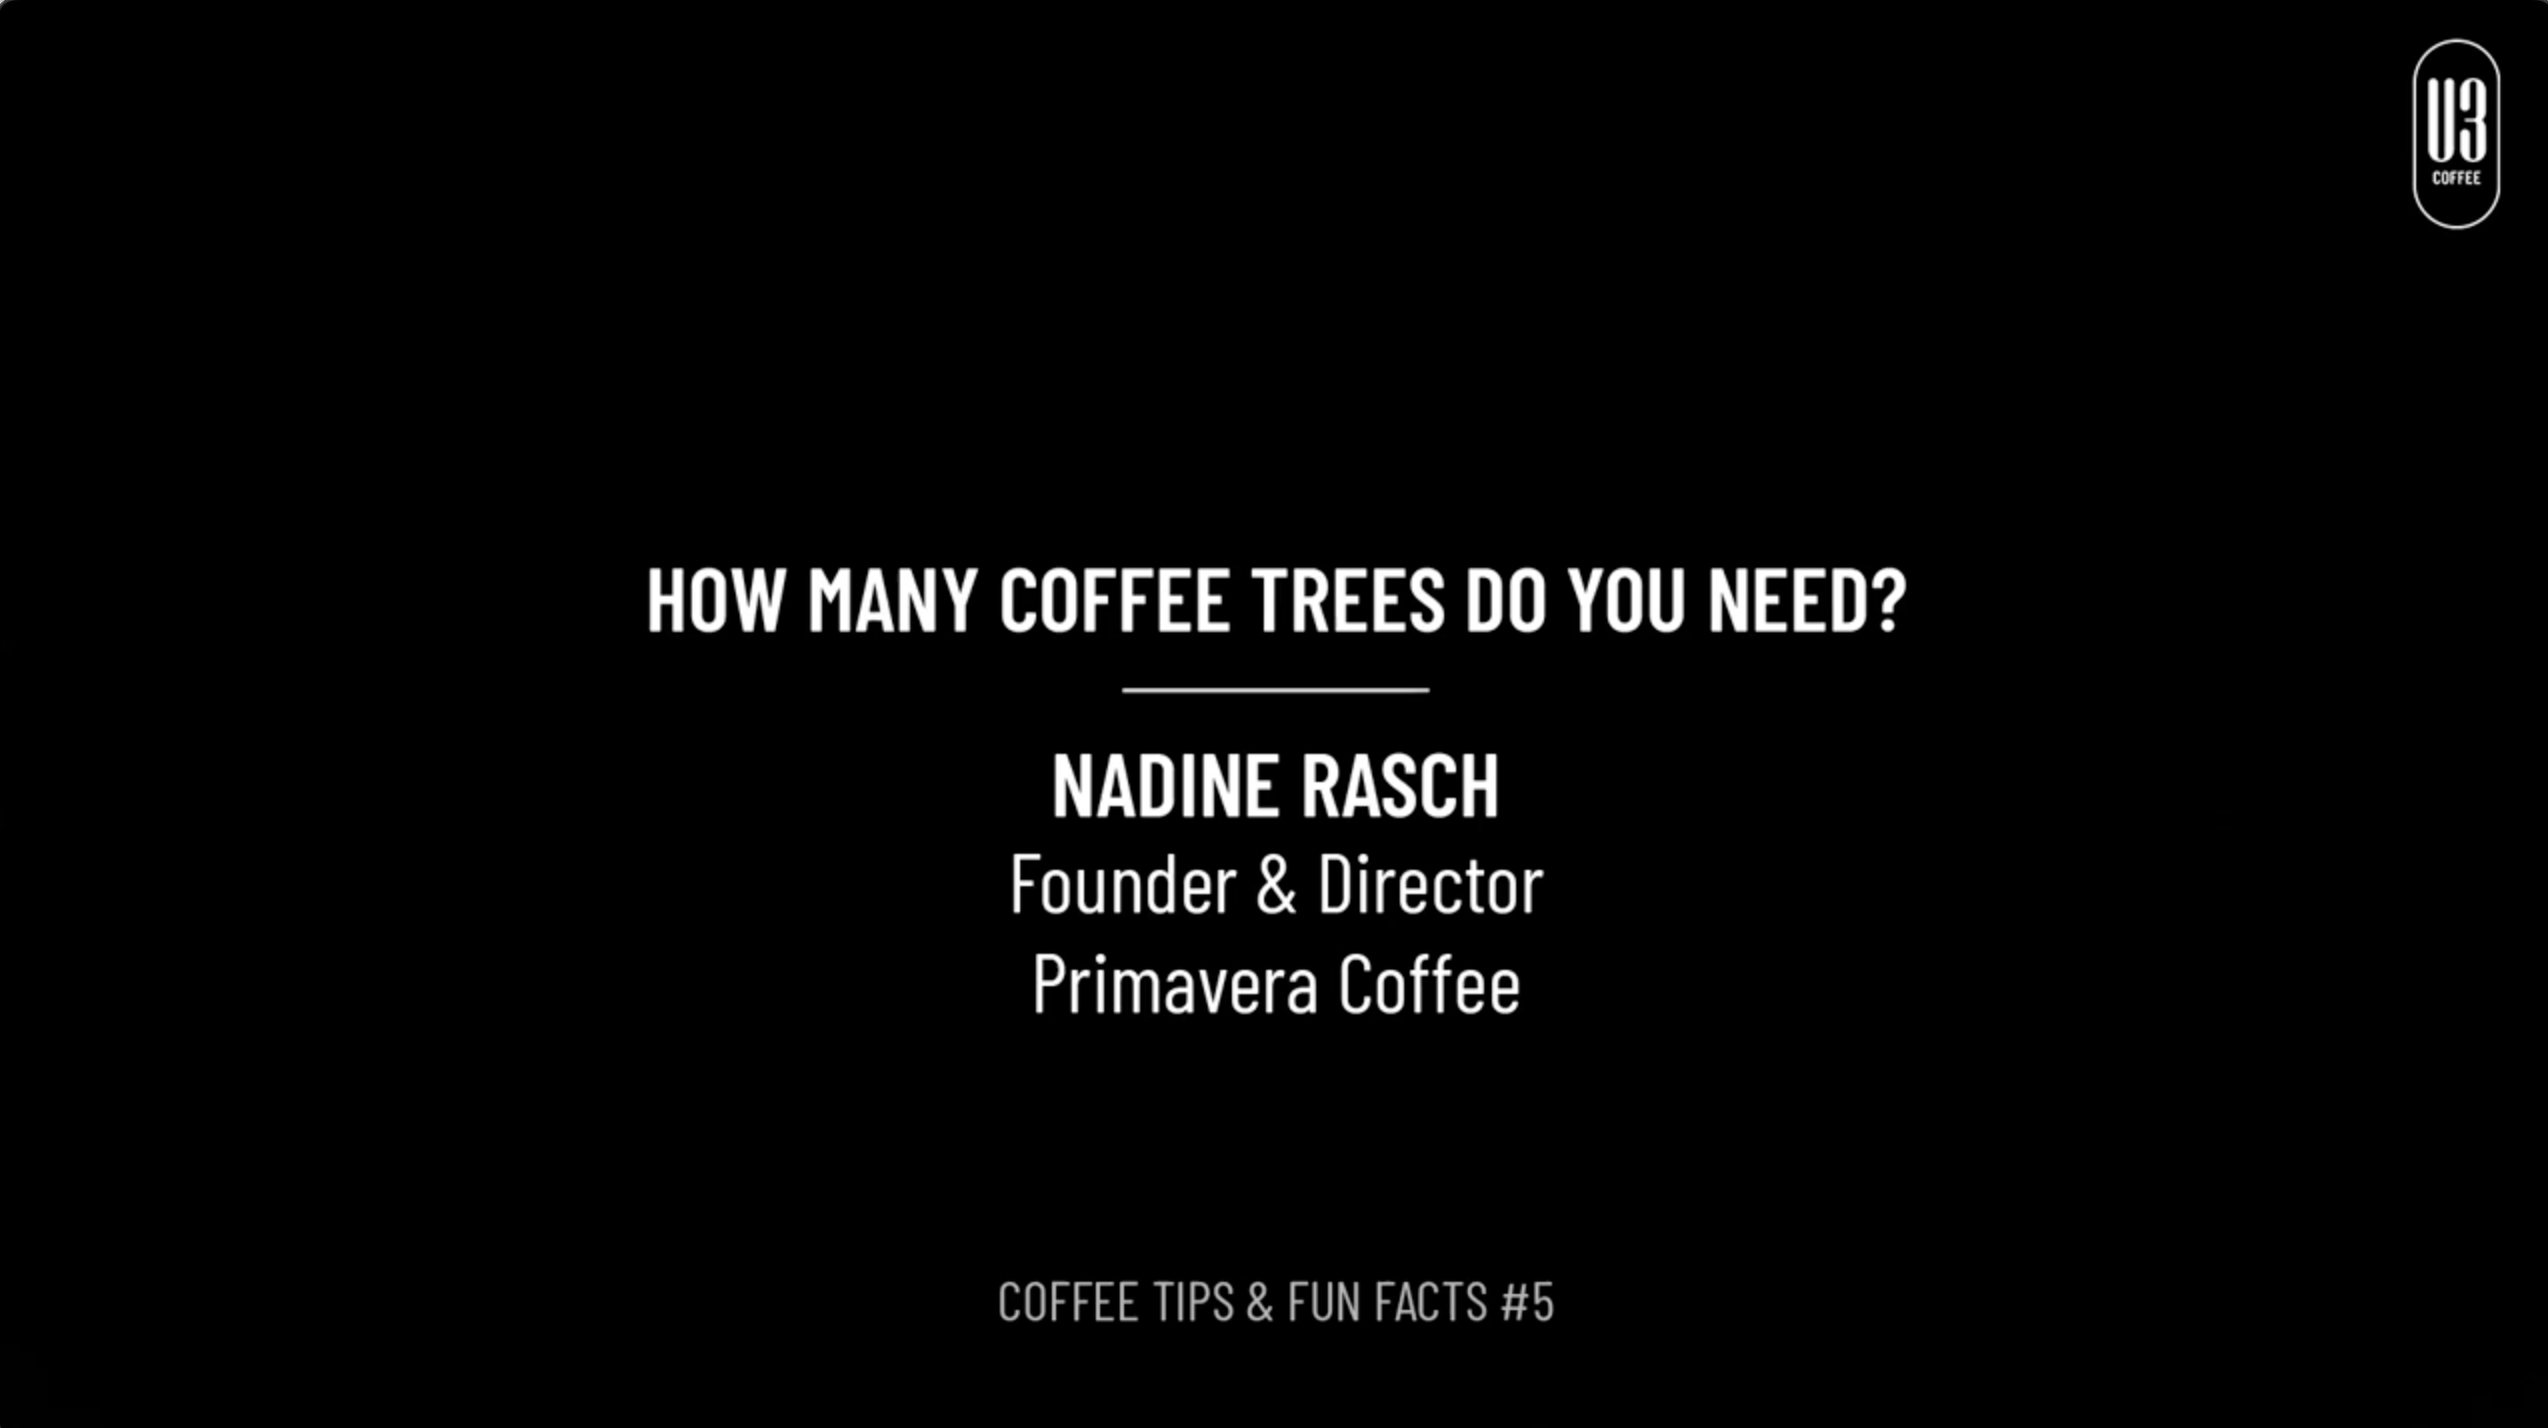 #5 Coffee Tips & Fun Facts: Nadine Rasch, Founder & Director of Primavera Coffee gives an interesting fact on how many coffee trees needed.